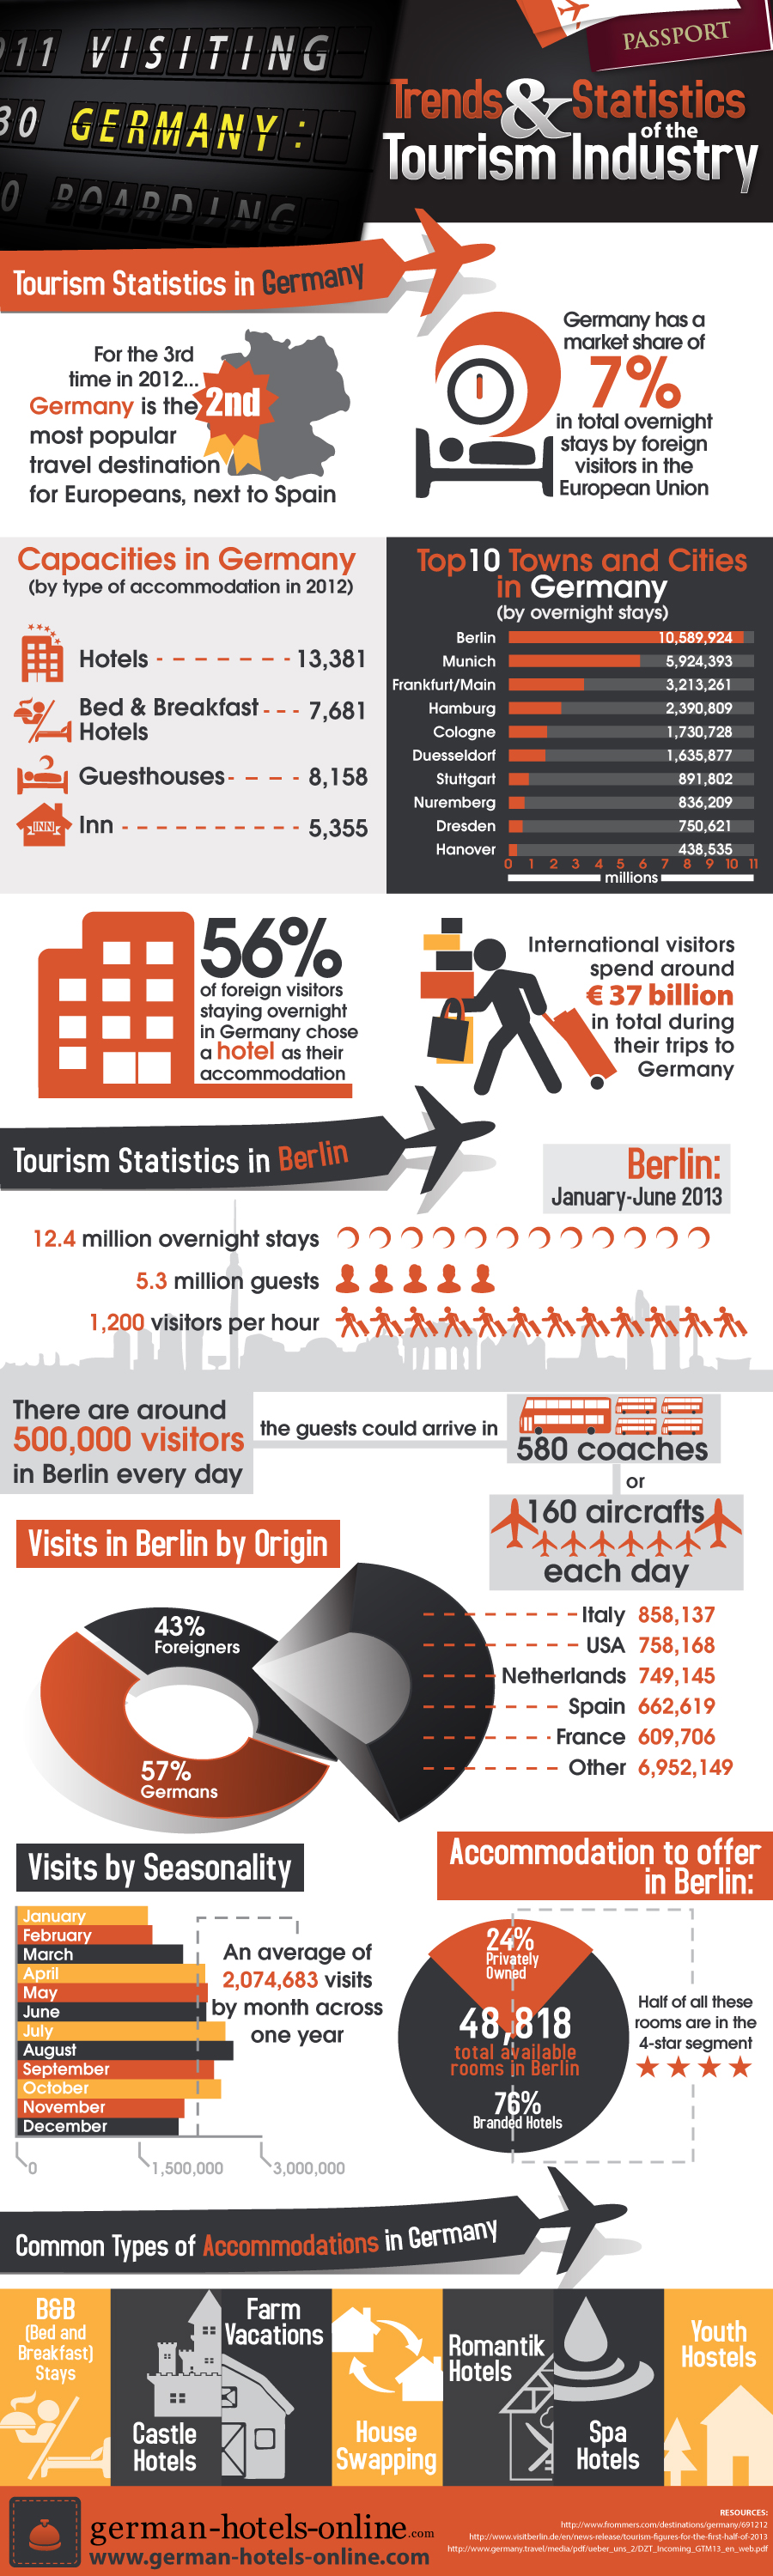 Visiting Germany: Trend and Statistics of the Tourism Industry | Visual.ly